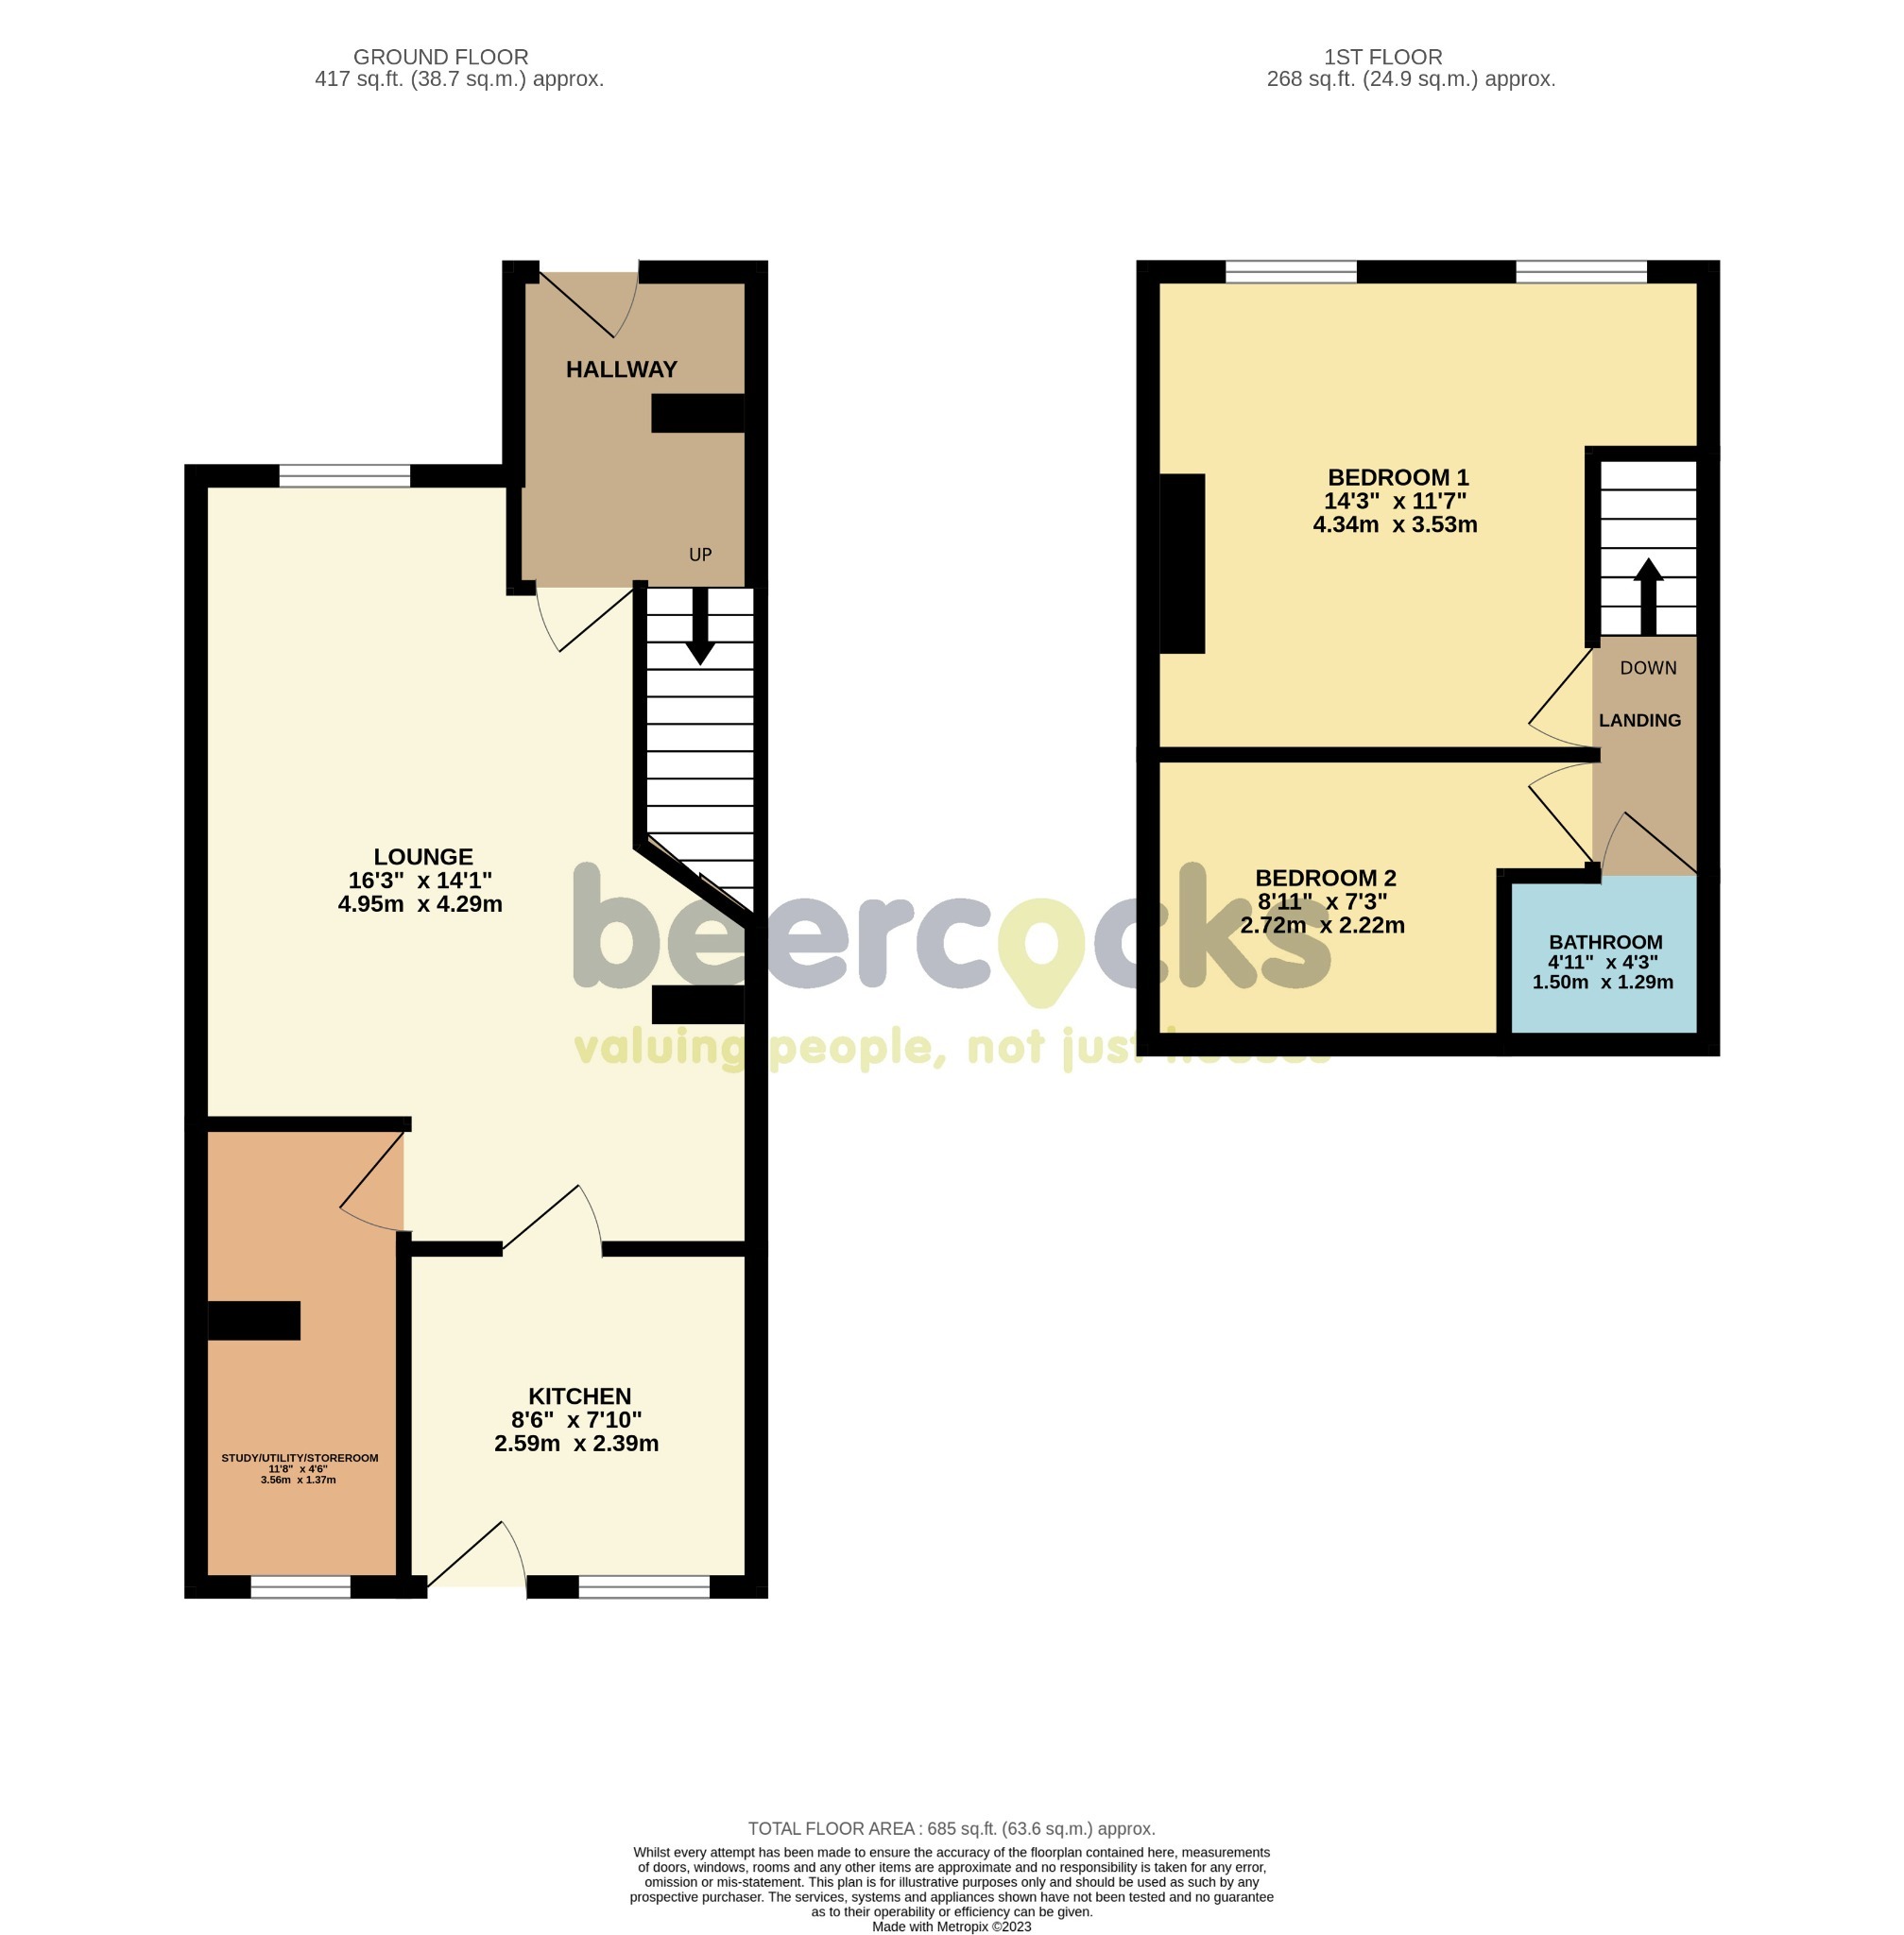 2 bed terraced house for sale in Brooklands Road, Hull - Property Floorplan